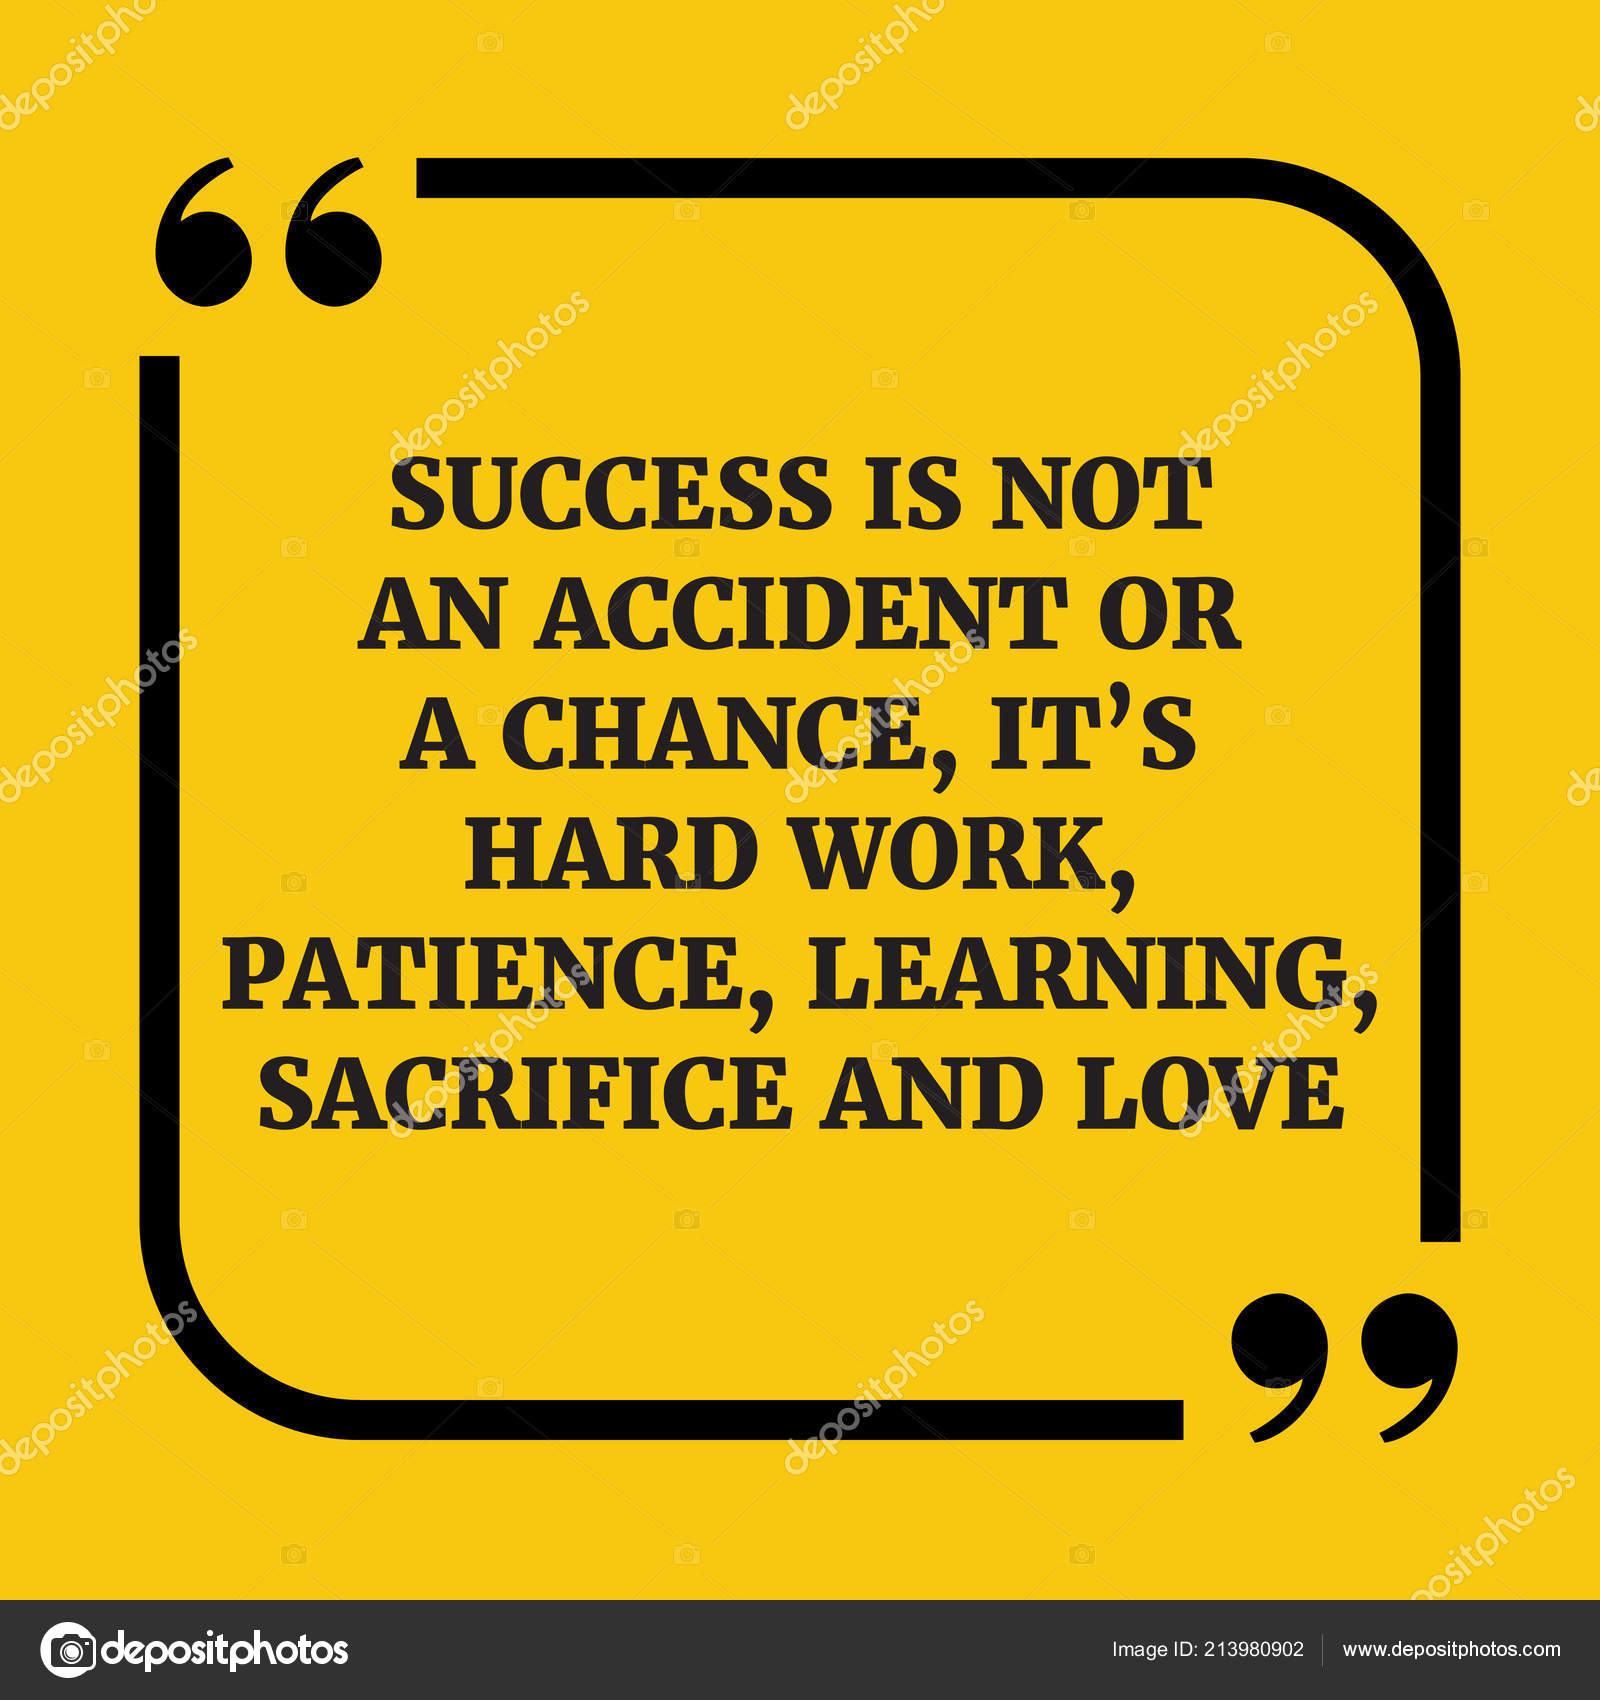 Motivational Quote Success Accident Chance Hard Work Patience